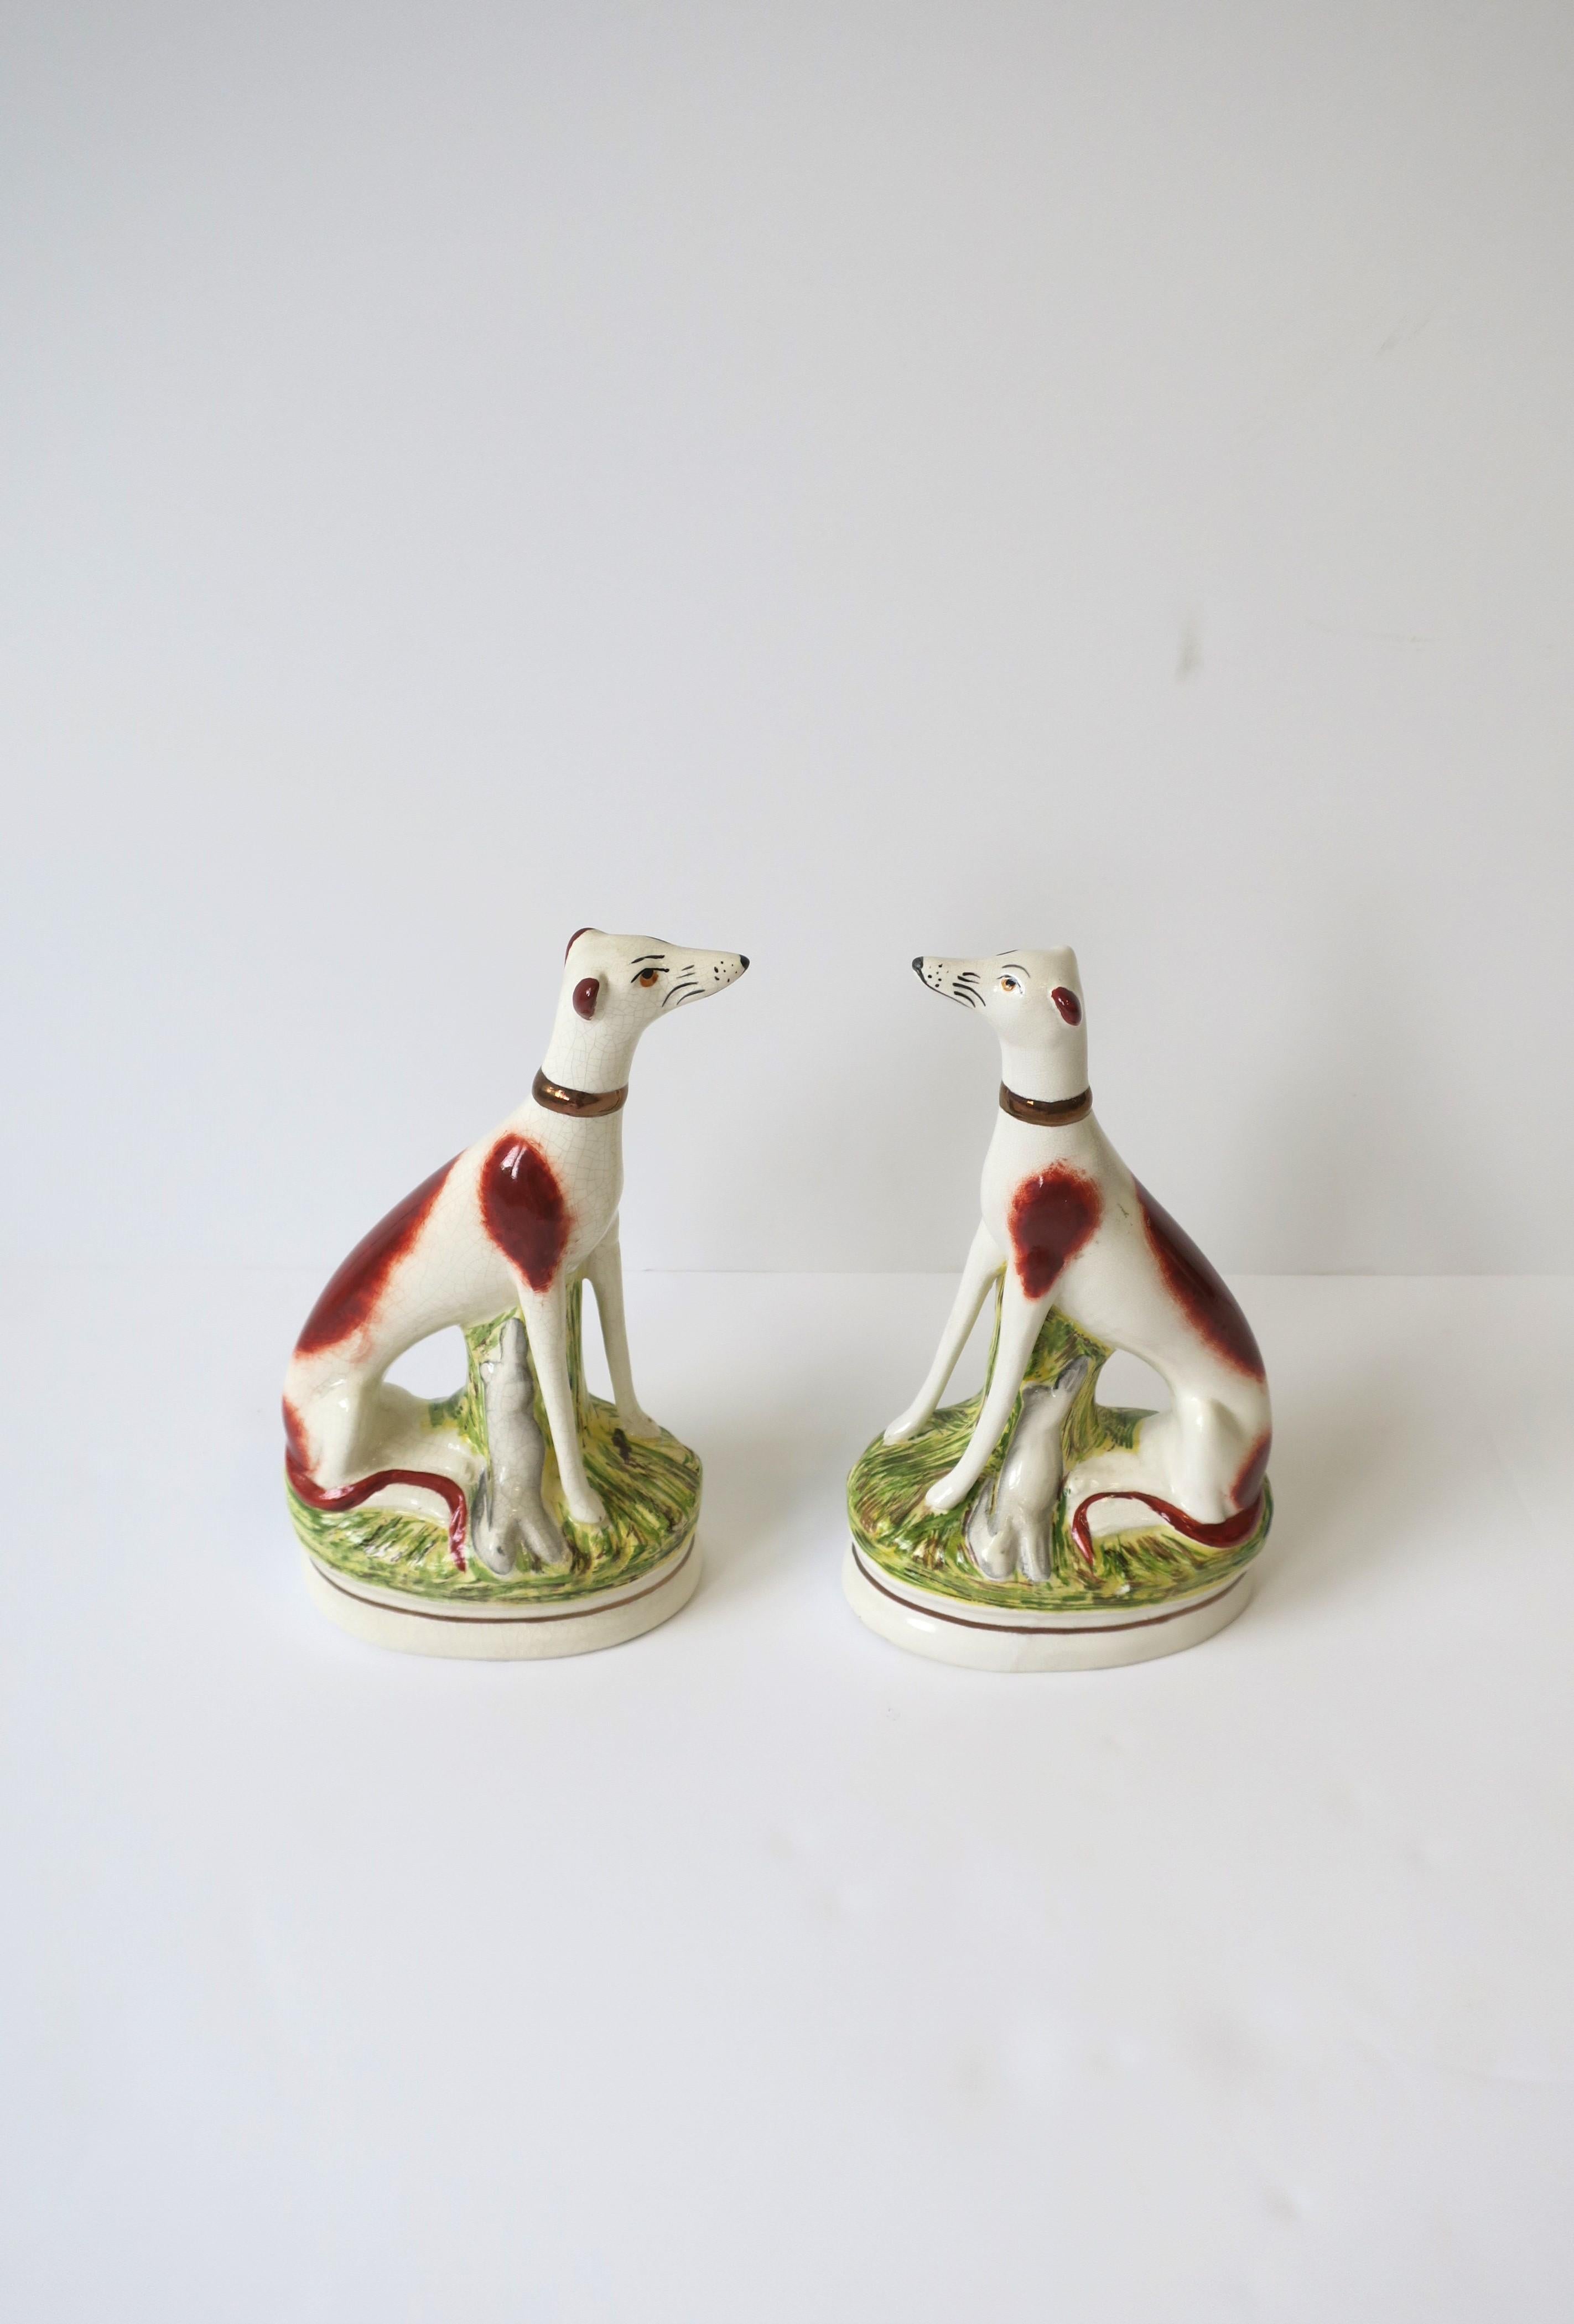 20th Century English Staffordshire Dogs Bookends or Decorative Objects, Pair